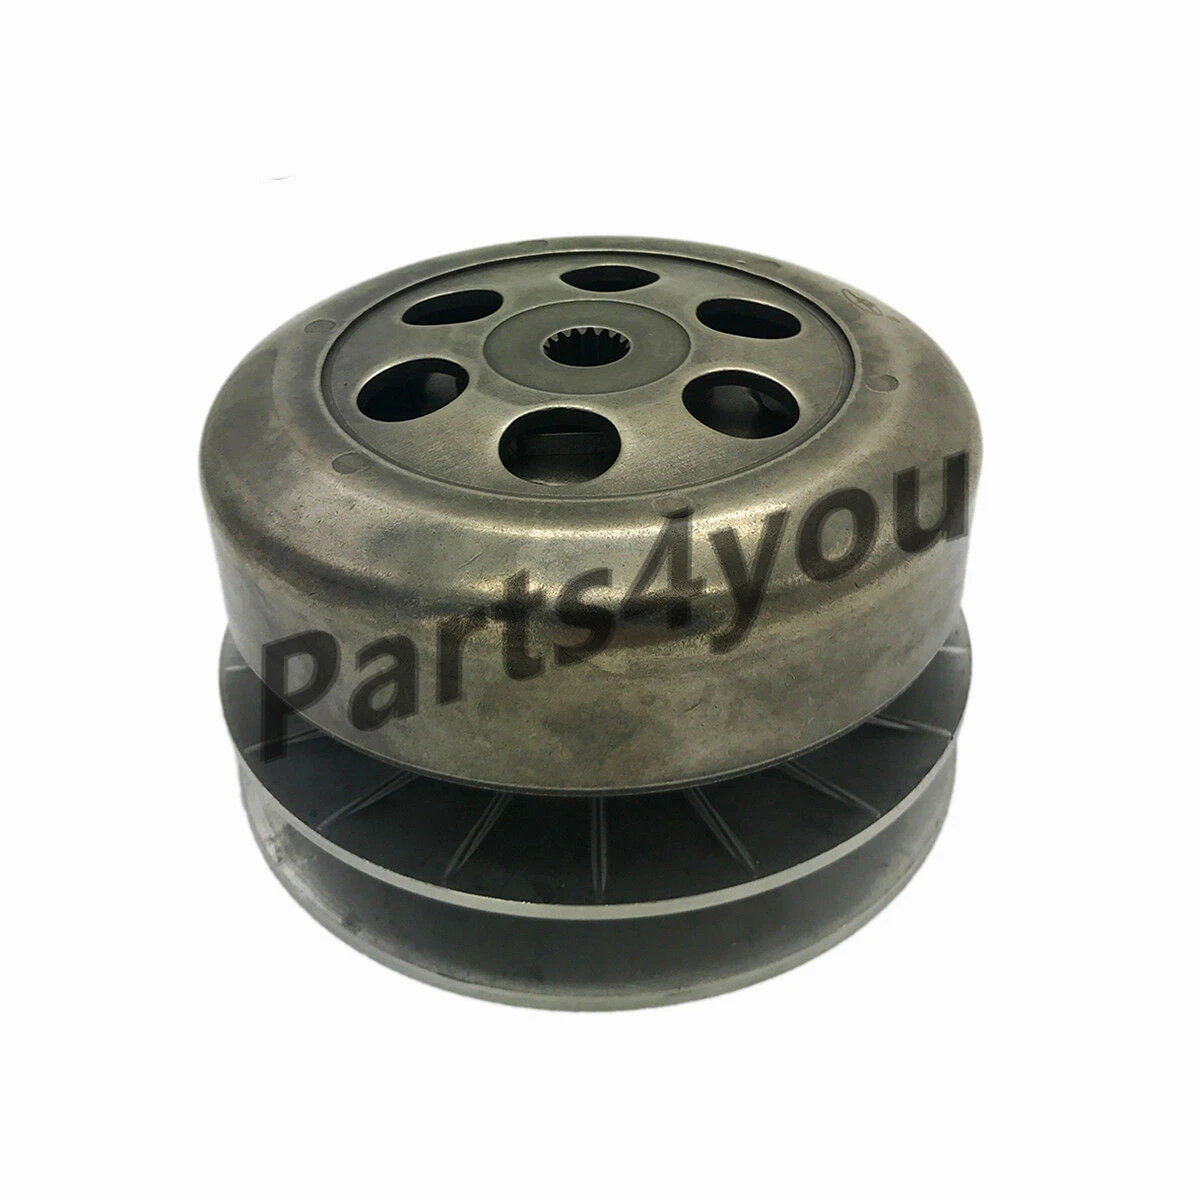 Secondary Clutch Variator Driven Pulley Assy for Stels 300B Buyang 300cc D300 G300 ATV Quad 2.3.01.1000 LU020075 clutch operating assy for hyundai starex h1 h100 h 100 41700 43150 new clutch driven cylinder 4170043150 41700 43150